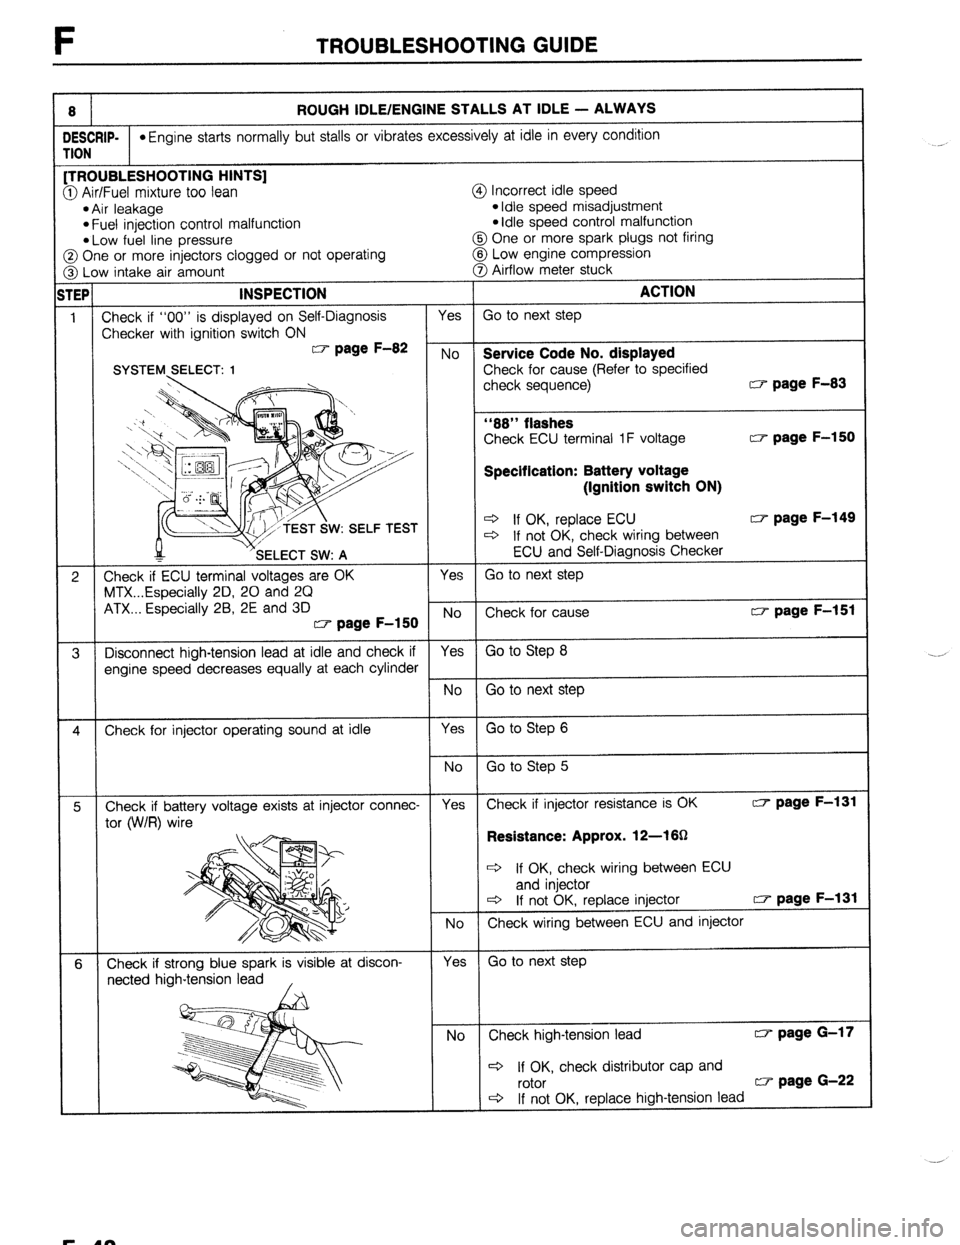 MAZDA PROTEGE 1992  Workshop Manual F TROUBLESHOOTING GUIDE 
8 ROUGH IDLE/ENGINE STALLS AT IDLE - ALWAYS 
bESCRIP- l Engine starts normally but stalls or vibrates excessively at idle in every condition 
‘ION TROUBLESHOOTING HINTS] 
D 